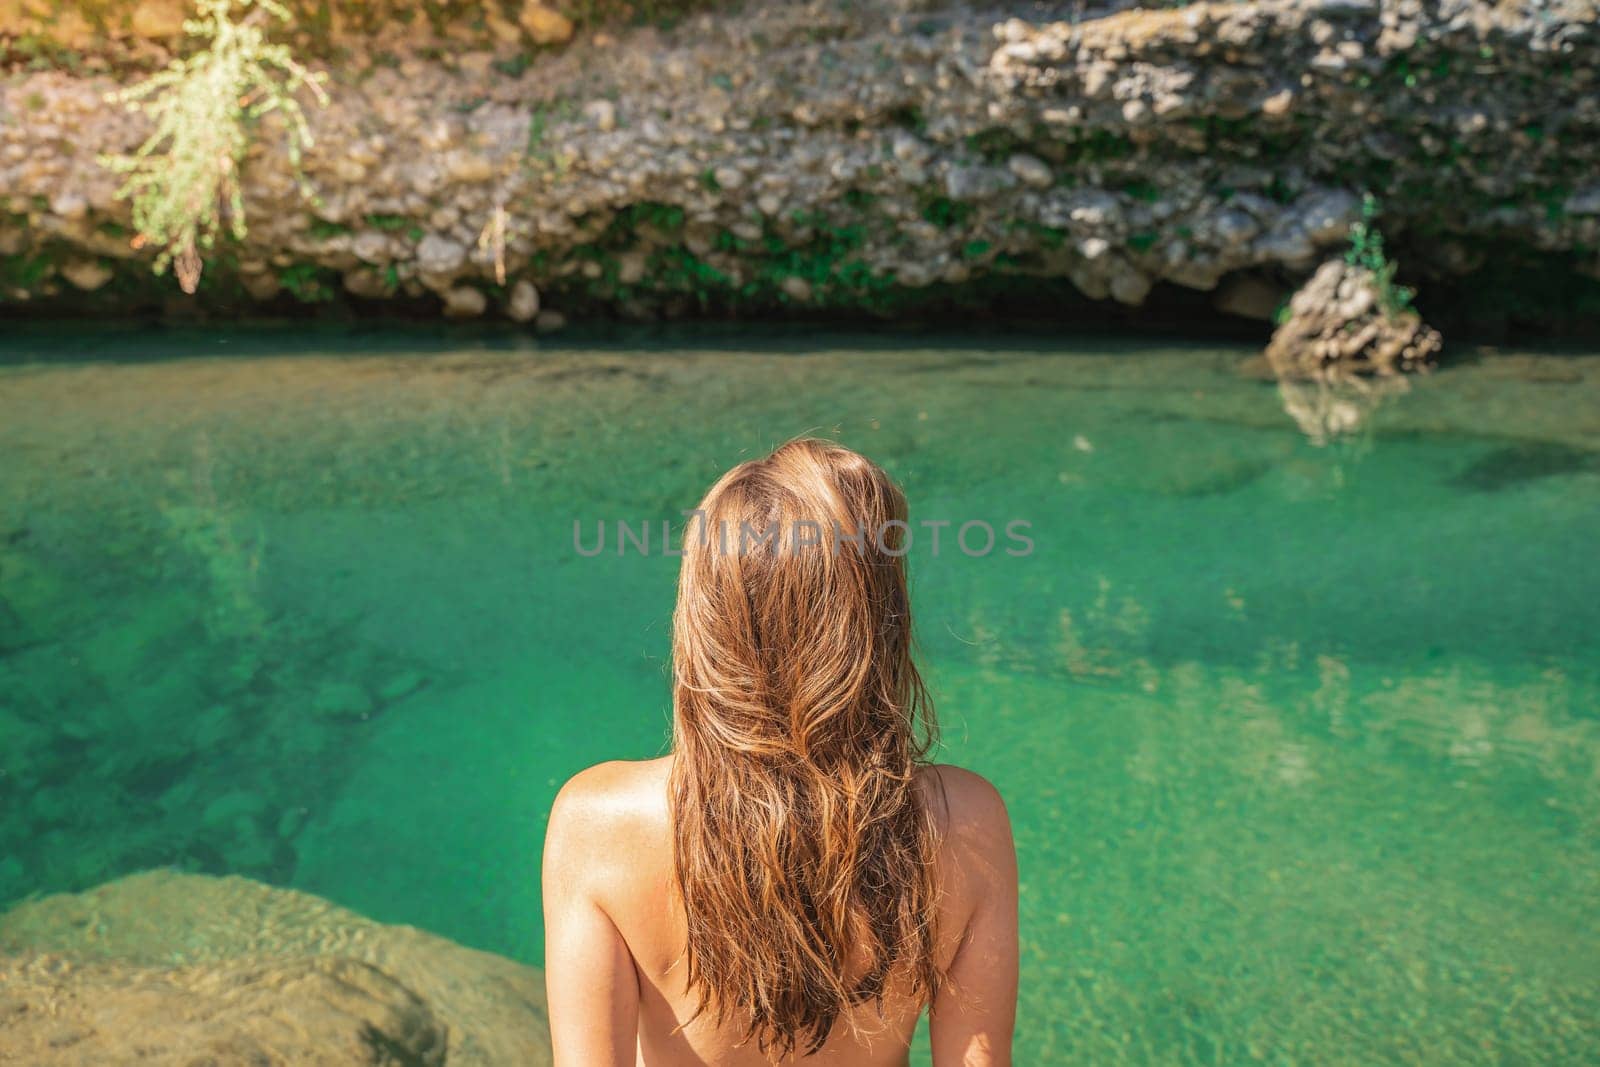 Summer background with a girl with golden blonde hair in front of a crystal clear river. by PaulCarr